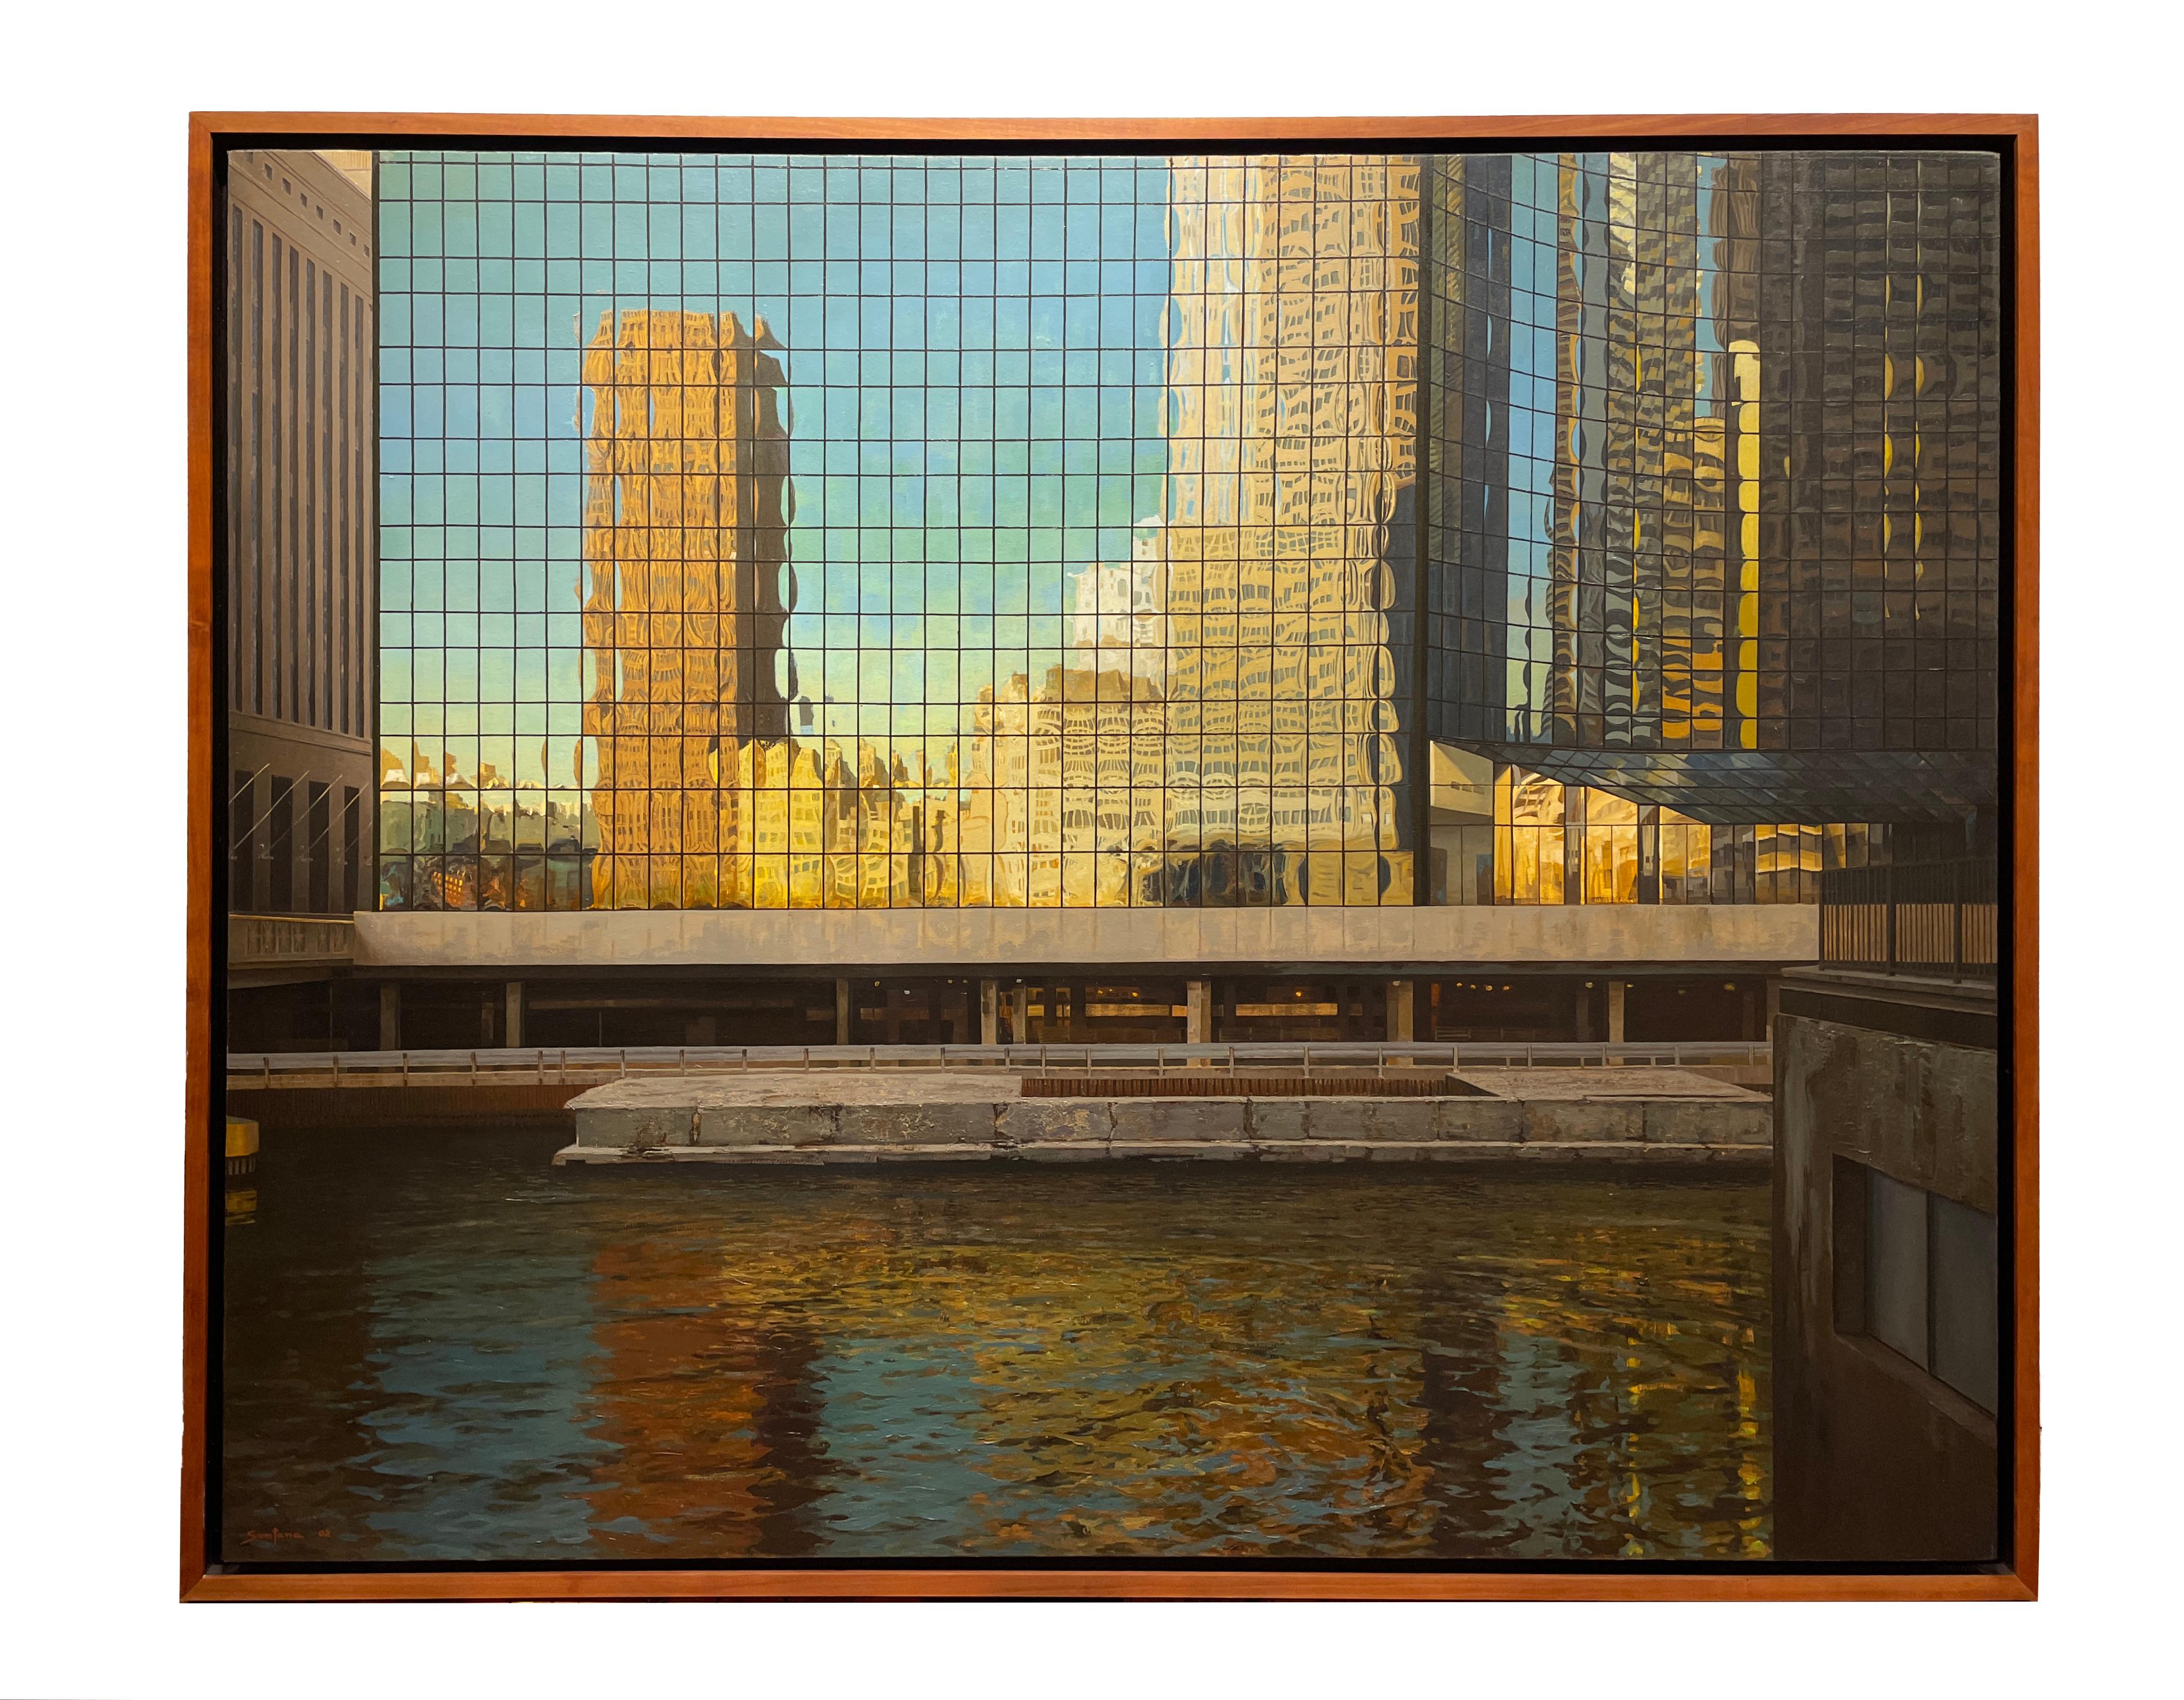 Deconstruction- Chicago Loop Architecture Reflecting on Building, Oil on Linen - Painting by Enrique Santana